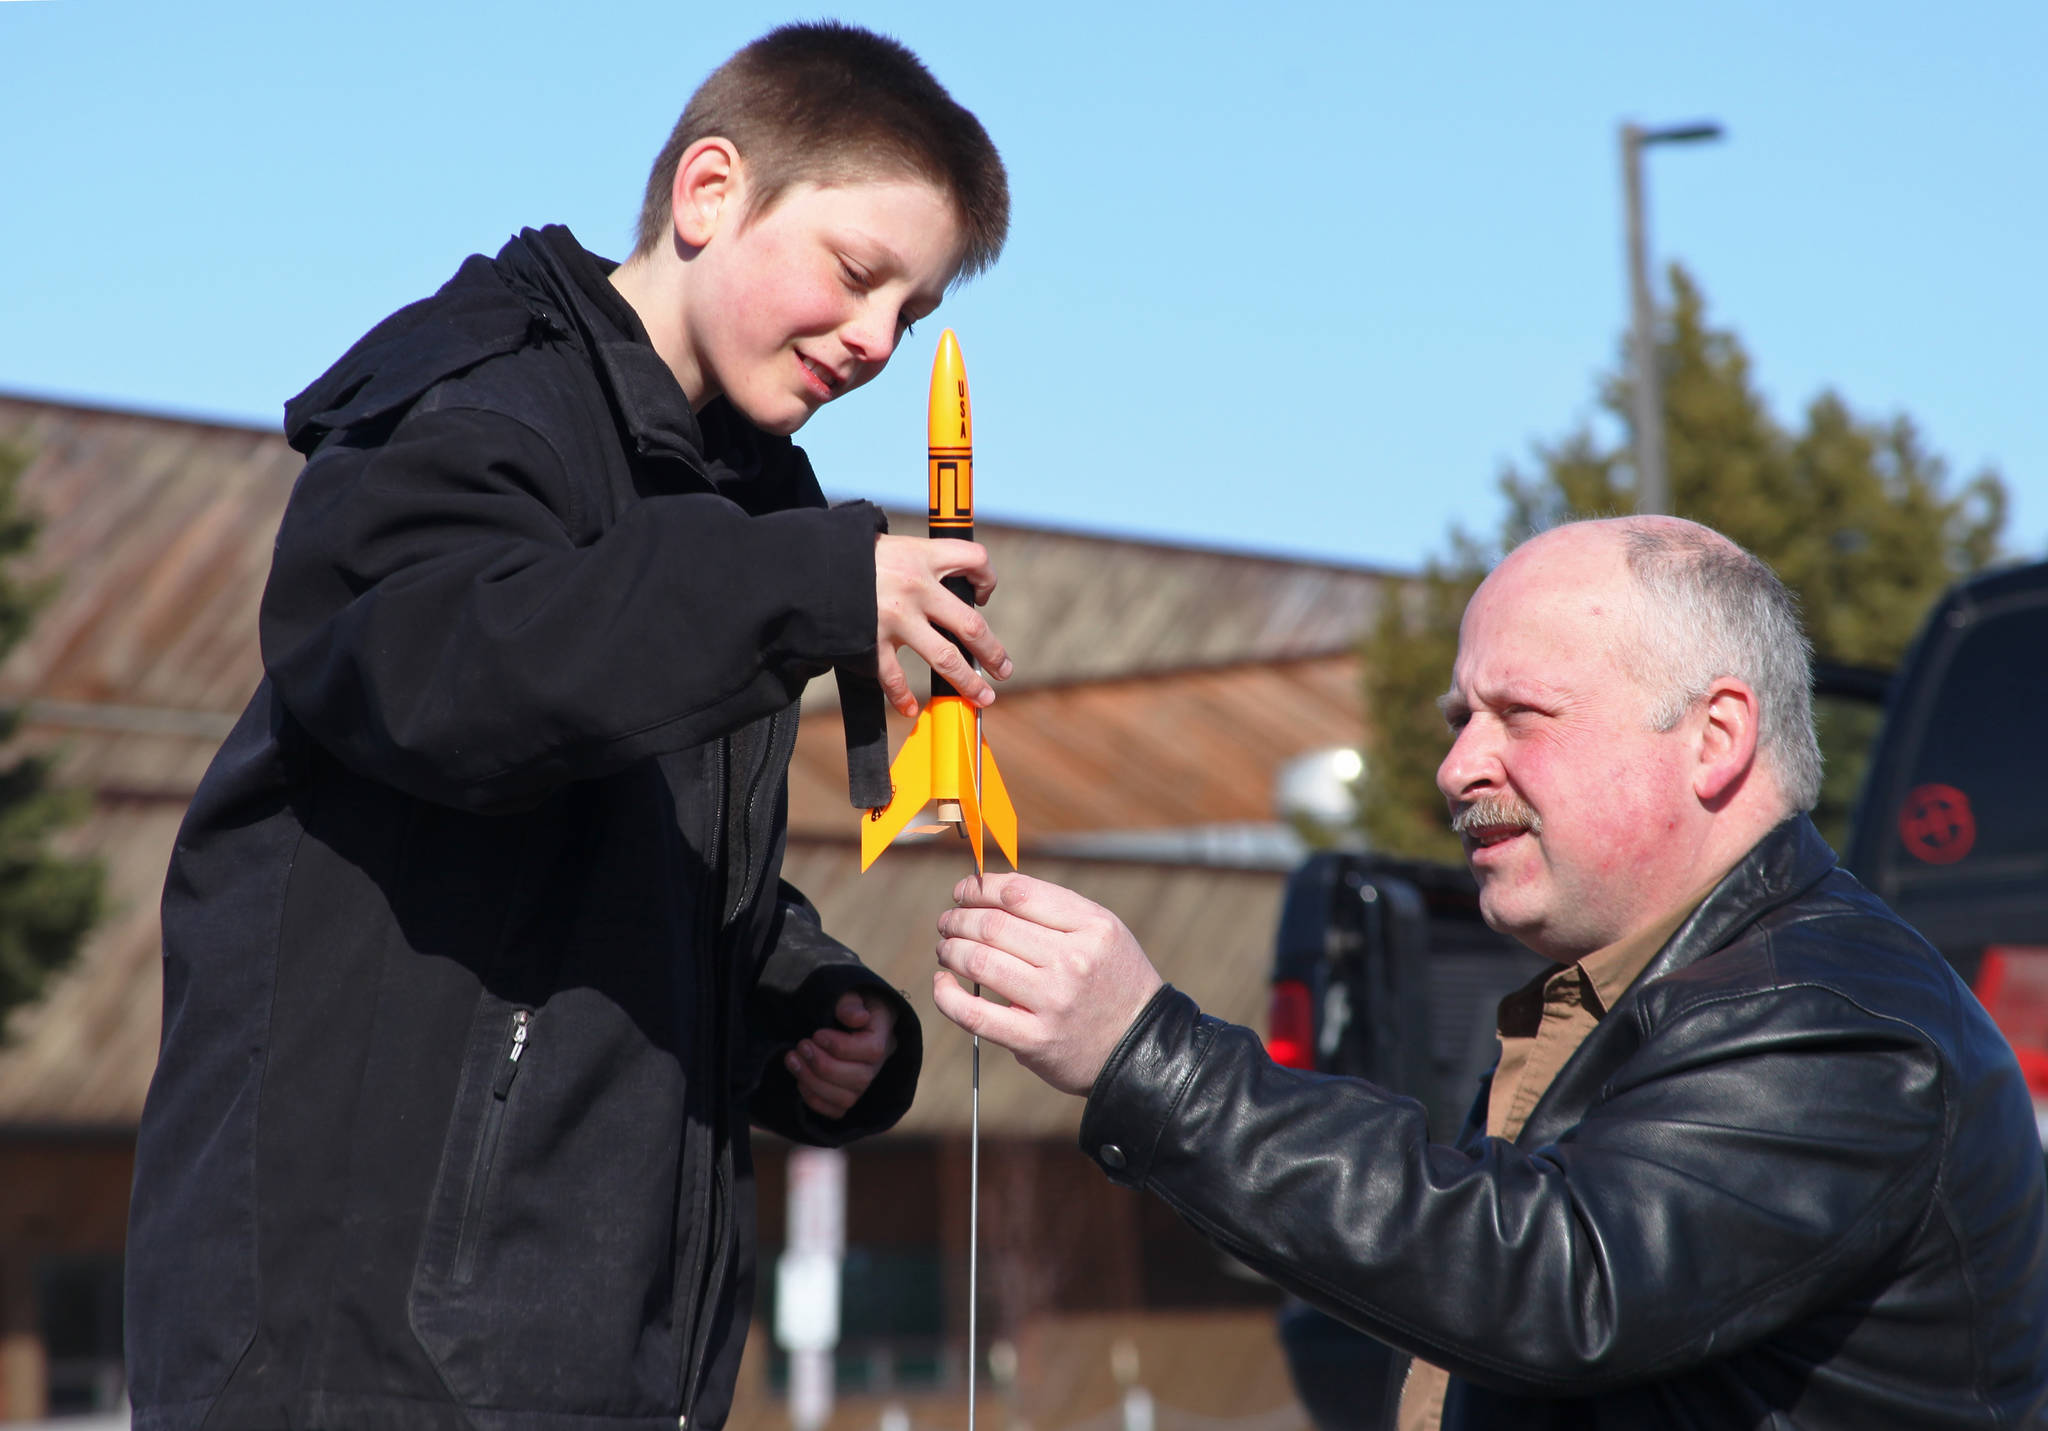 Asa Lorentzen (left) mounts a model rocket on its launch rod while instructor Scott Aleckson observes in the parking lot of the Soldotna Regional Sports Complex in Soldotna, Alaska on Saturday, May 31, 2018. Aleckson said he made and launched his first plastic, balsa wood, and cardboard rocket as a 4th grade student at Soldotna Elementary School. Since then he’s built a custom launch system, he said, “with recycled electronics and a lot of soldering time.” Aleckson taught Saturday’s rocketry class through the Soldotna Community Schools program, and would like to continue spreading the hobby. “If I could get a model rocket club going, that’d be great,” he said. “Stuff like this is much more fun in a group.” (Photo by Ben Boettger/Peninsula Clarion)